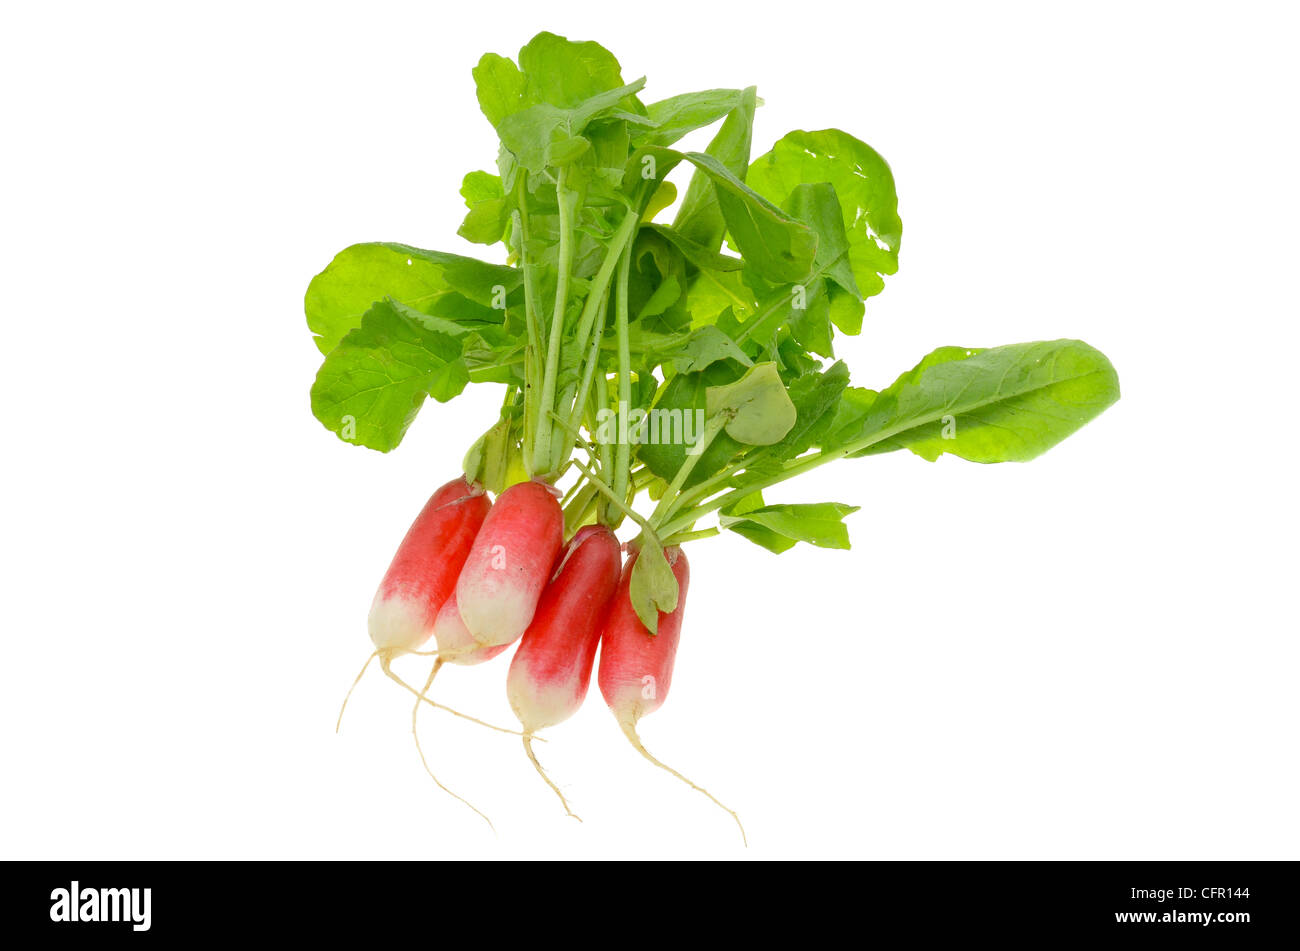 Fresh radishes taken in the studio with a high key white background Stock Photo